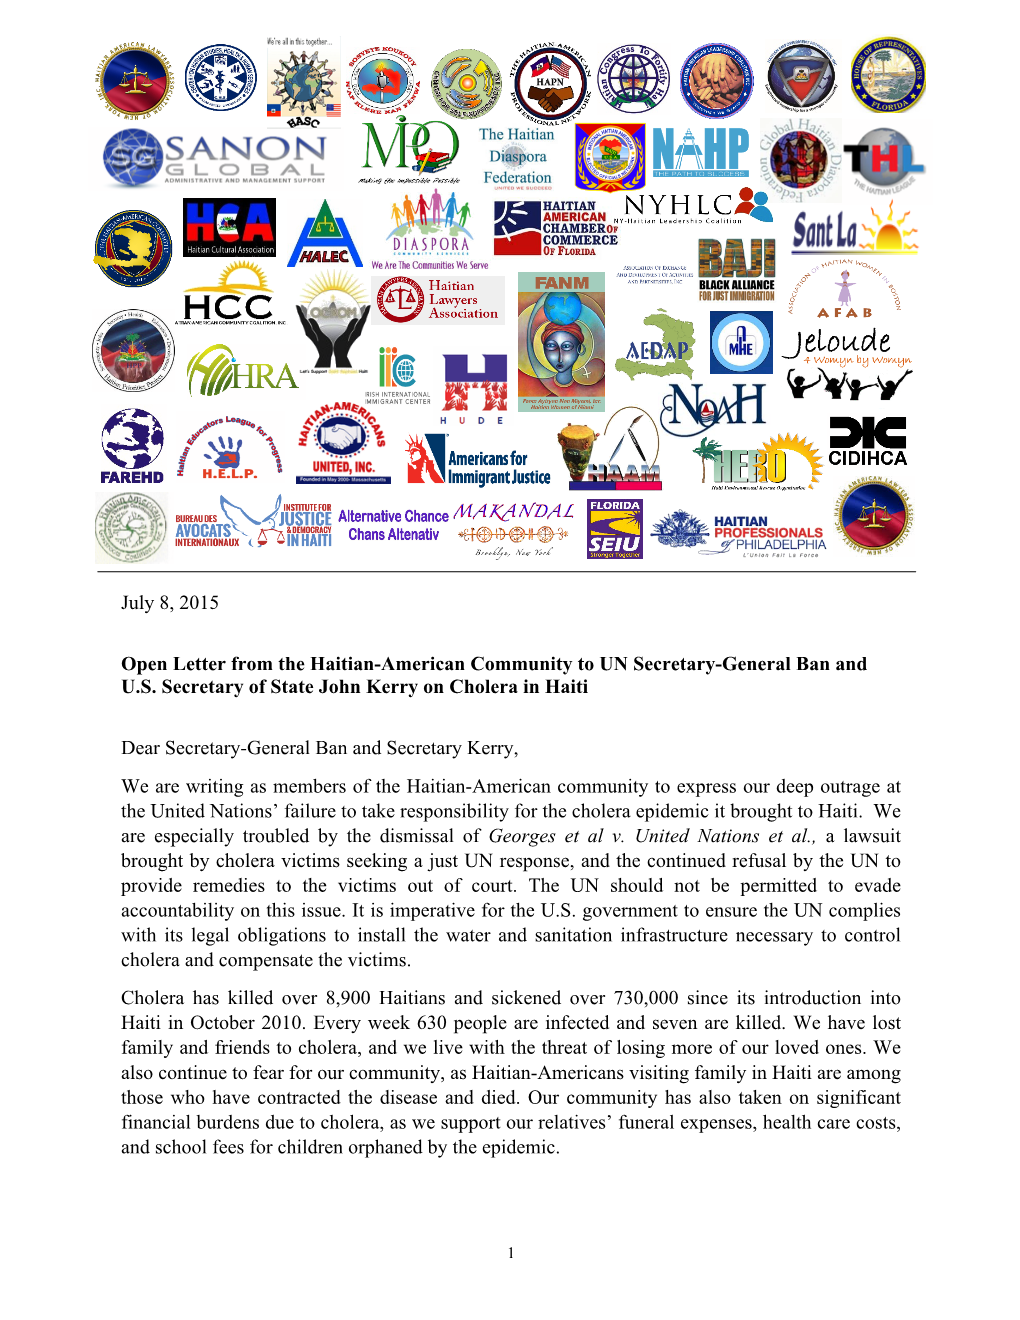 July 8, 2015 Open Letter from the Haitian-American Community to UN